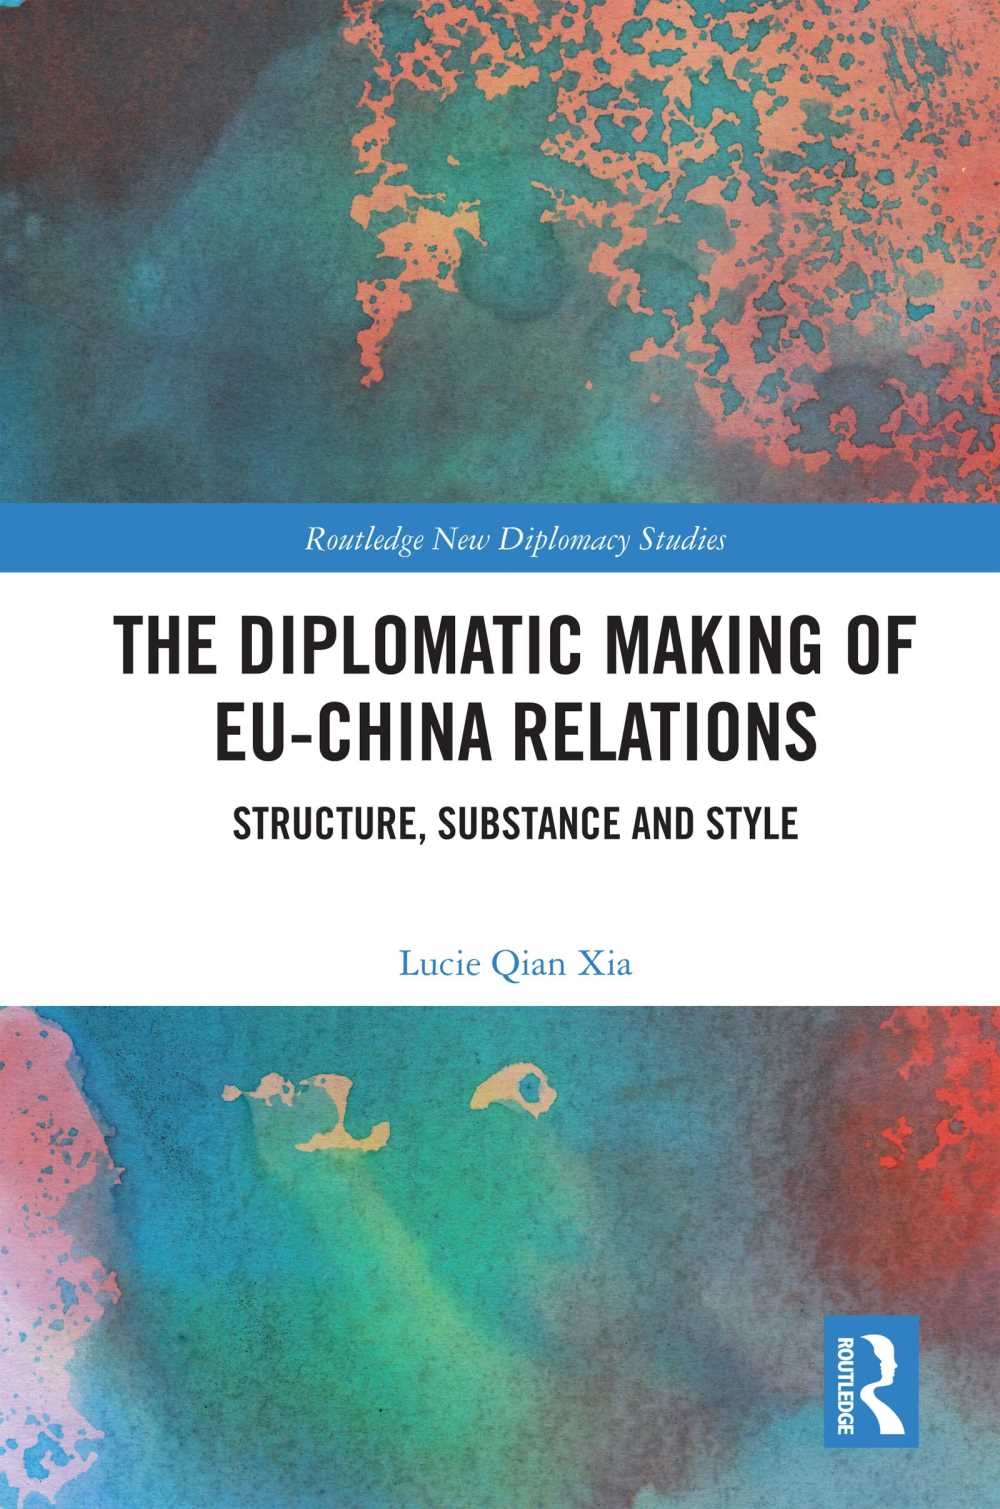 The Diplomatic Making of Eu-China Relations: Structure, Substance and Style